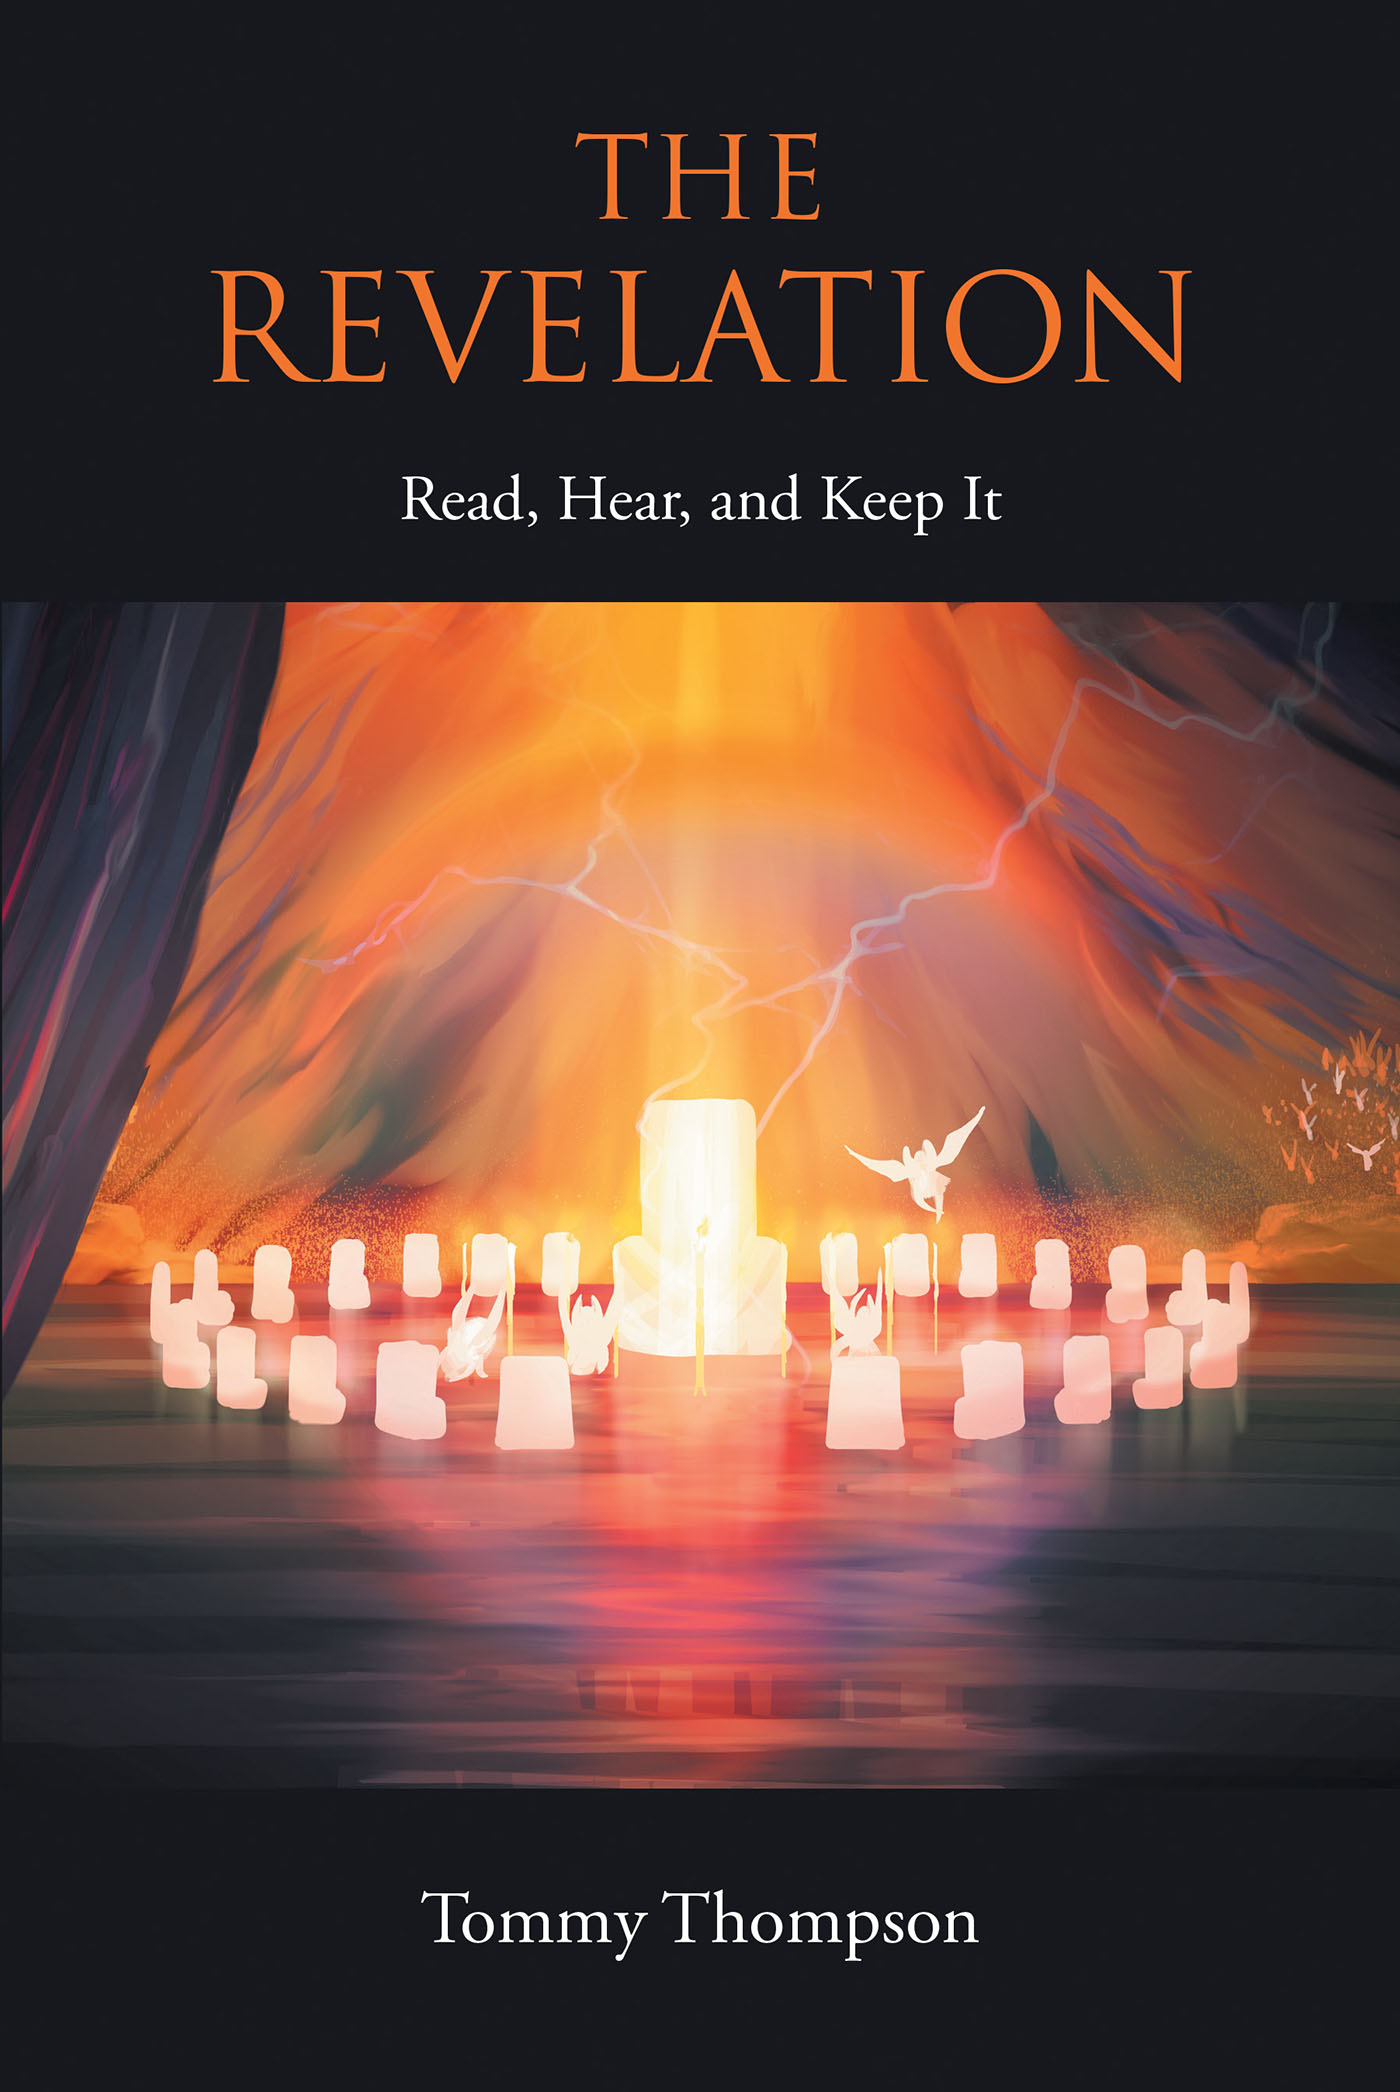 Tommy Thompson’s Newly Released "The Revelation: Read, Hear, and Keep It" is a Scholarly Study of Revelation That Brings Clarity to Key Prophetic Scripture